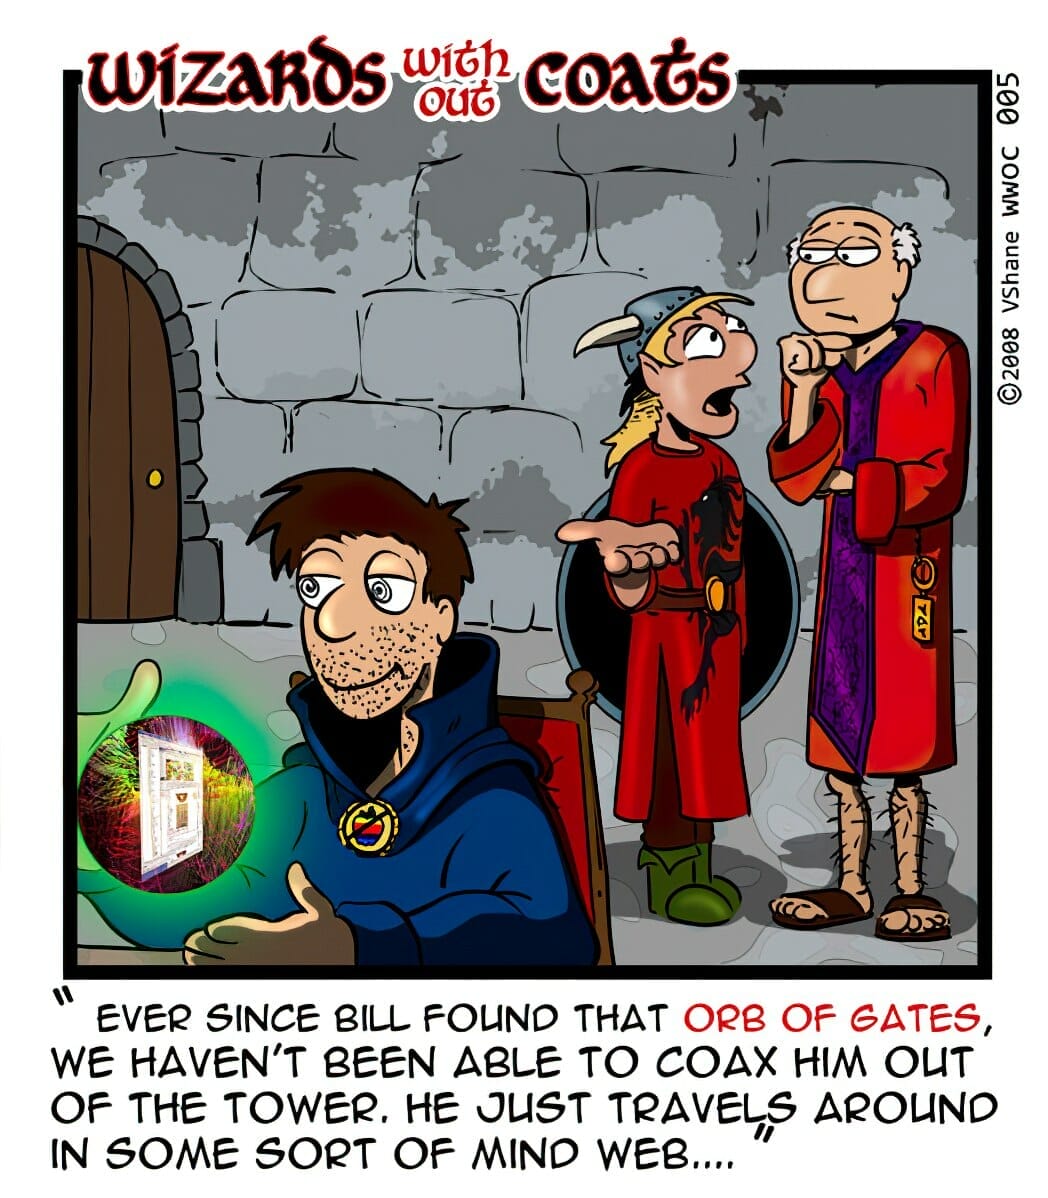 Wizards WIthout Coats